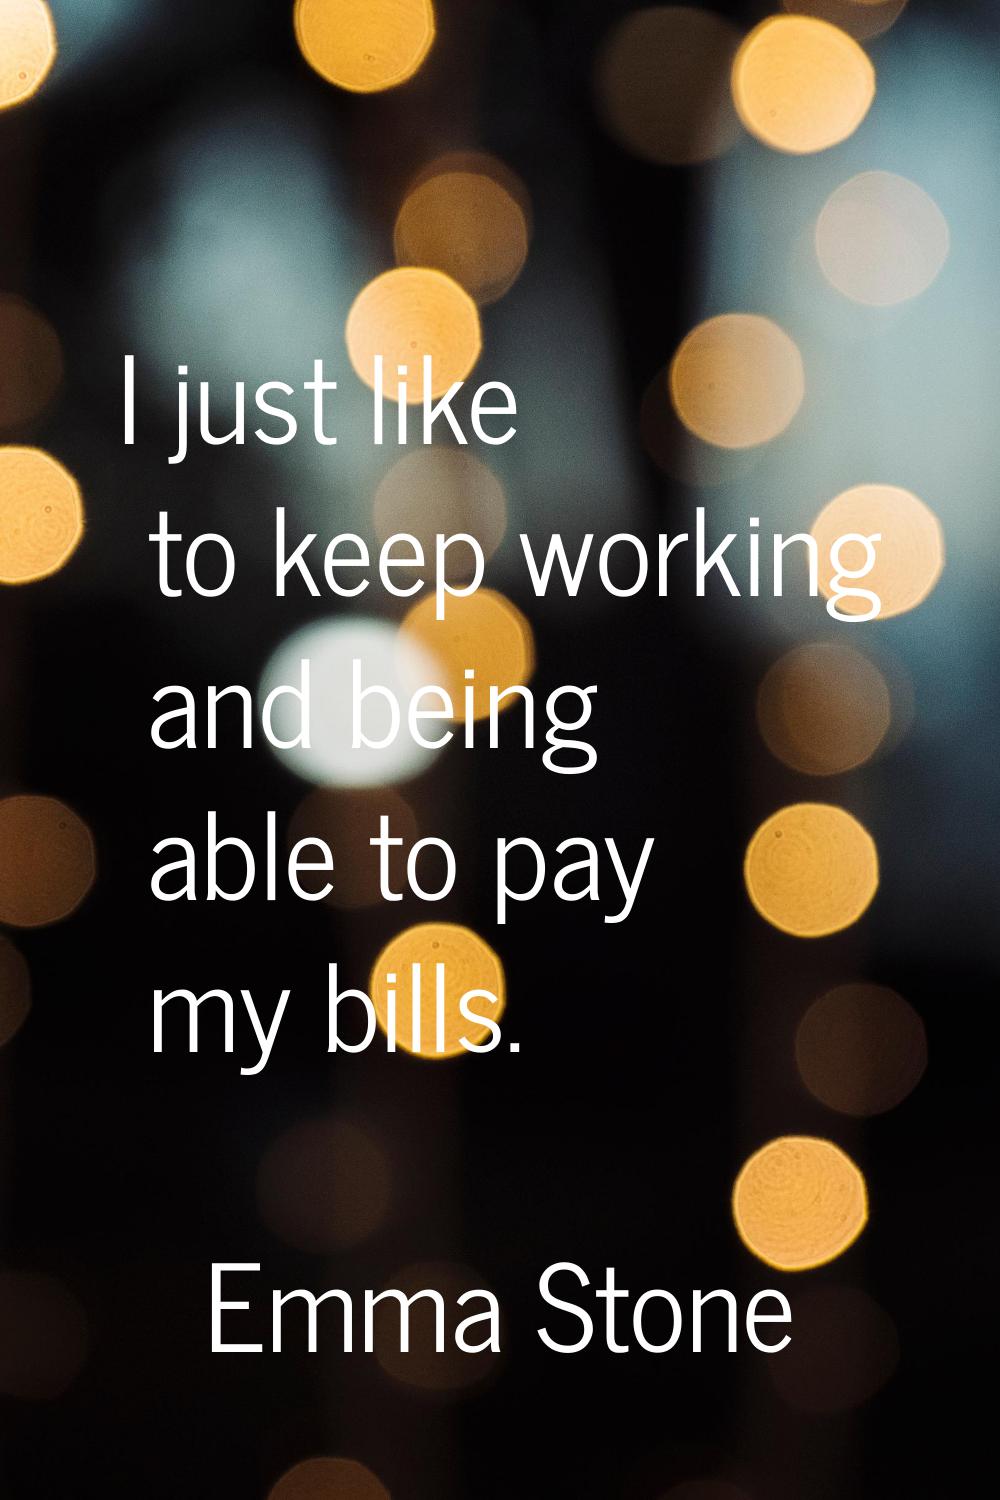 I just like to keep working and being able to pay my bills.